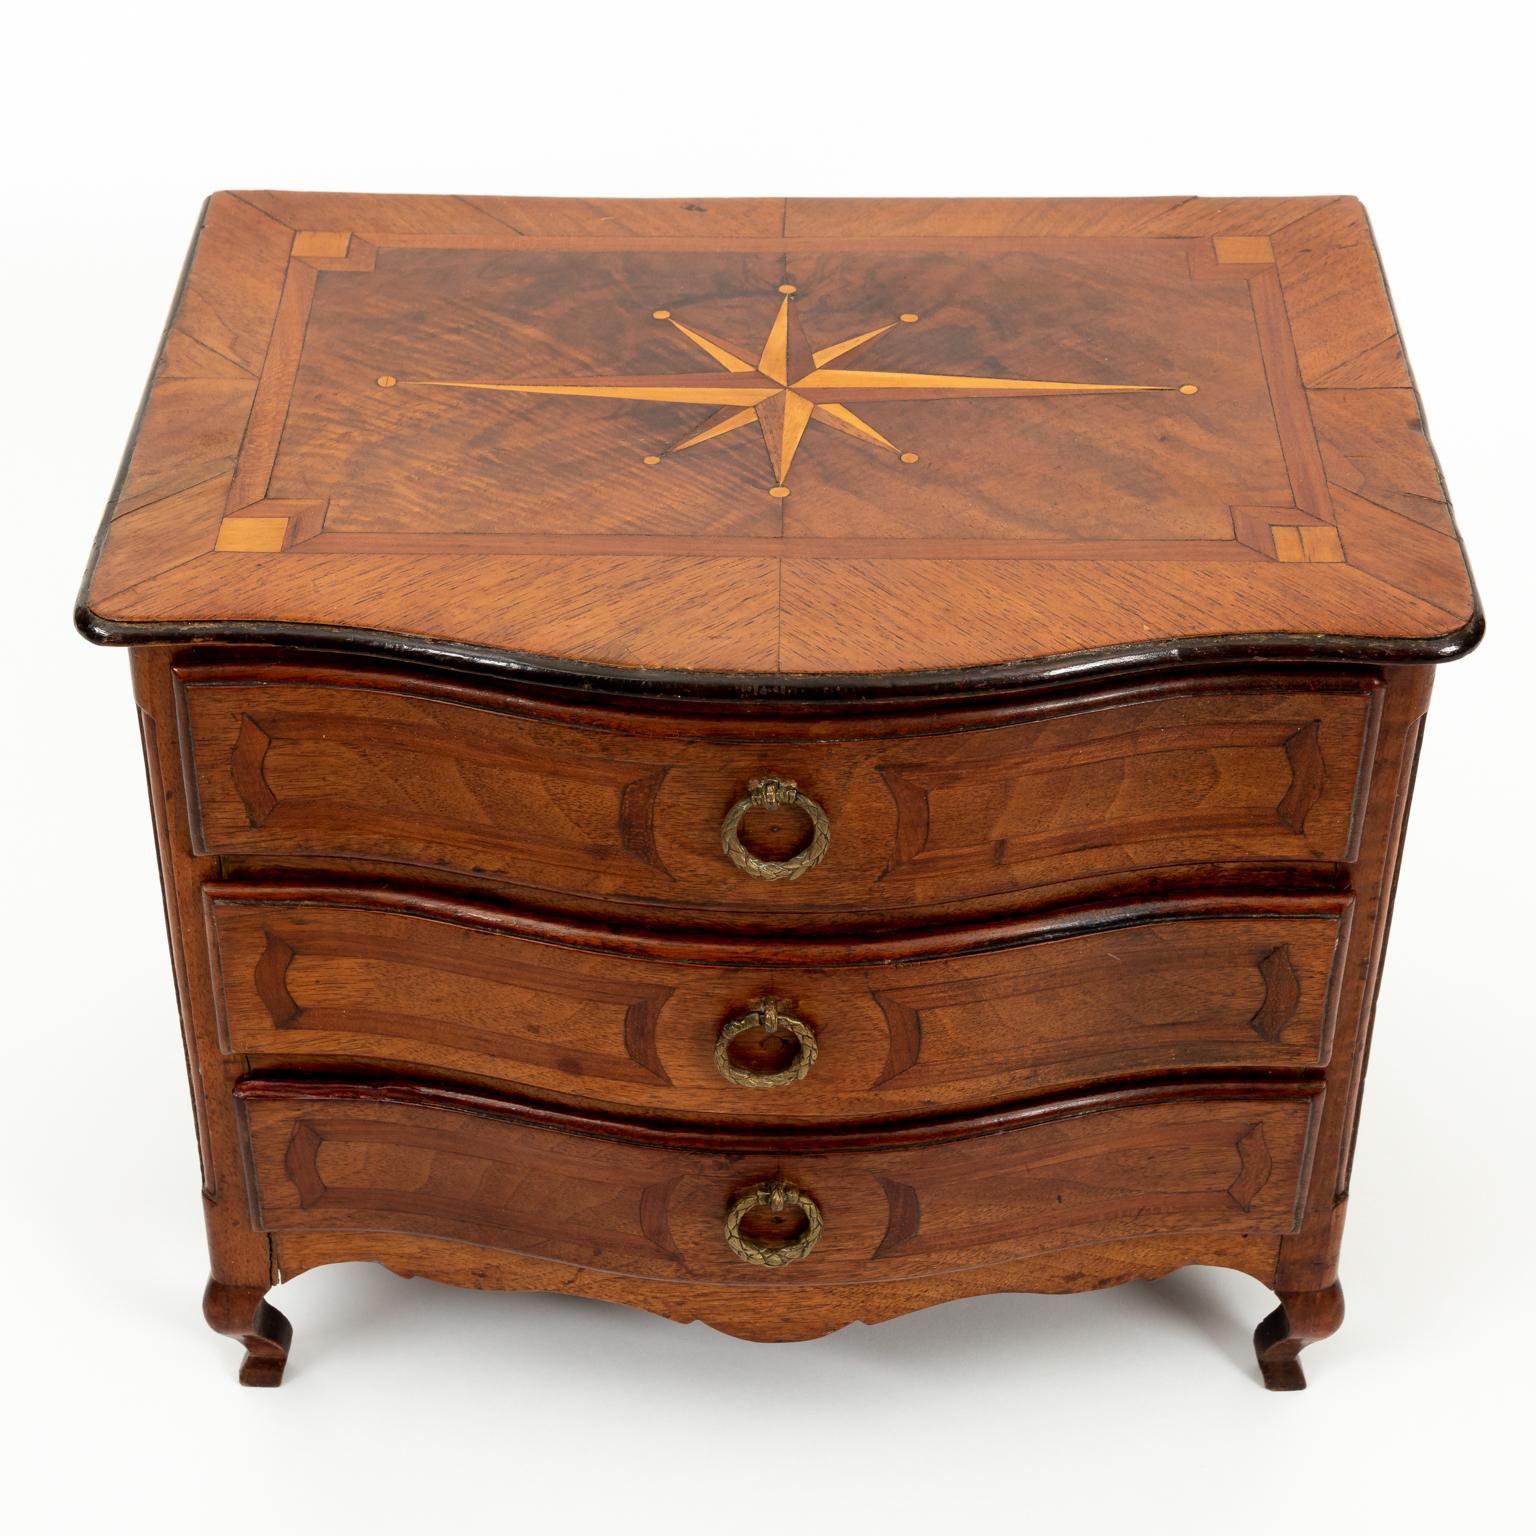 Circa 1860s 19th century French marquetry miniature chest of drawers with bronze handles and inlaid starburst design on the tabletop. Made in France. Please note of wear consistent with age including minor repair on upper lip of bottom drawer. Minor